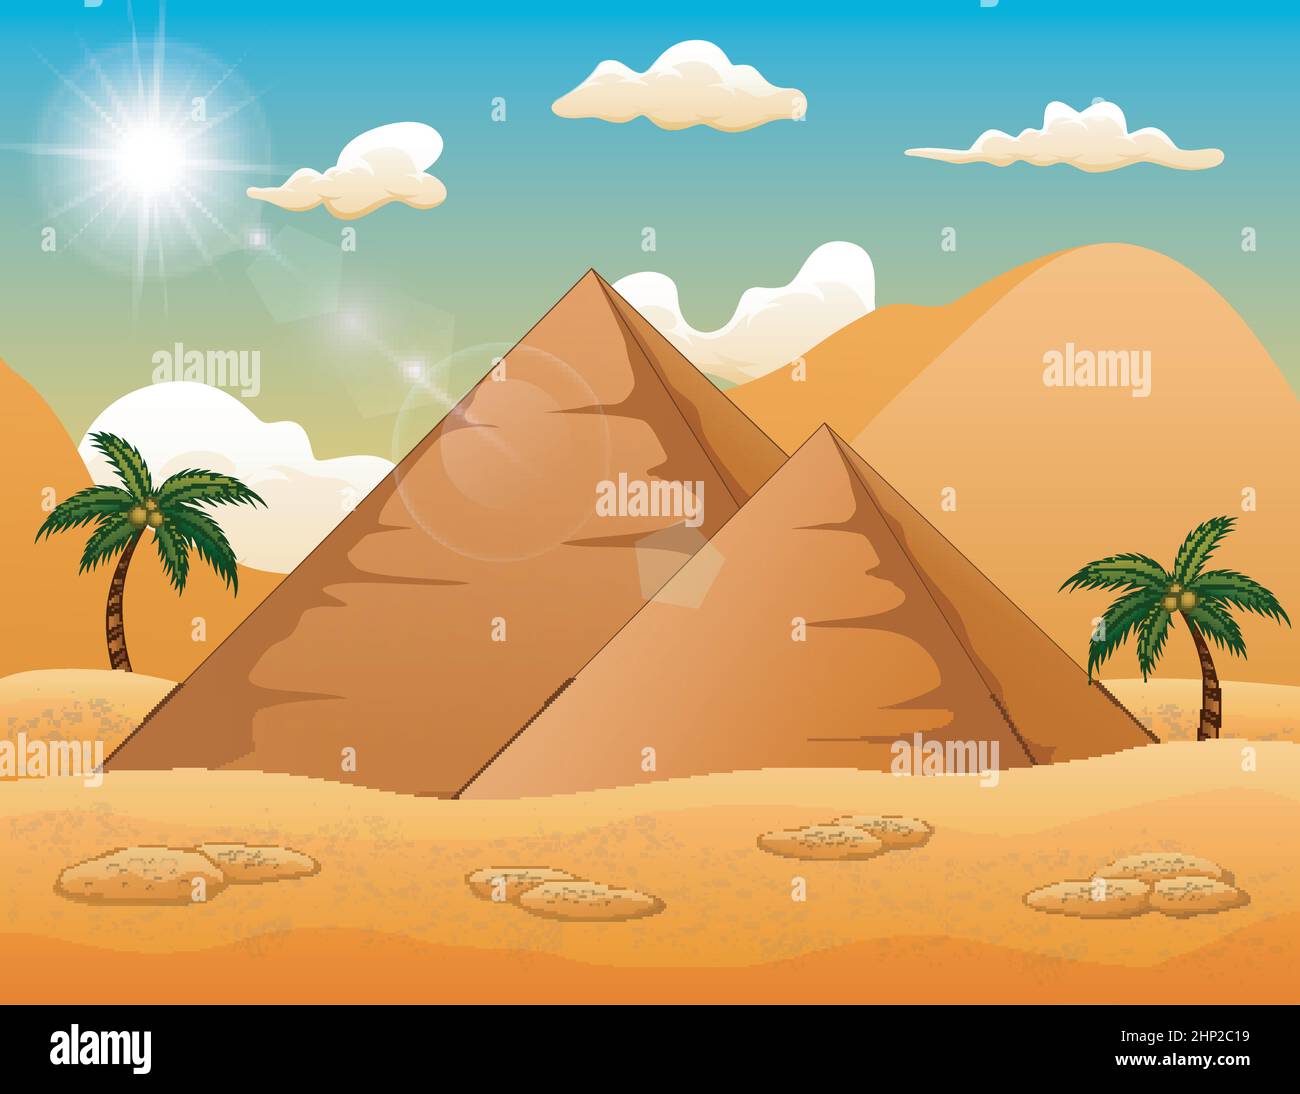 Desert background with pyramid and palm trees Stock Vector